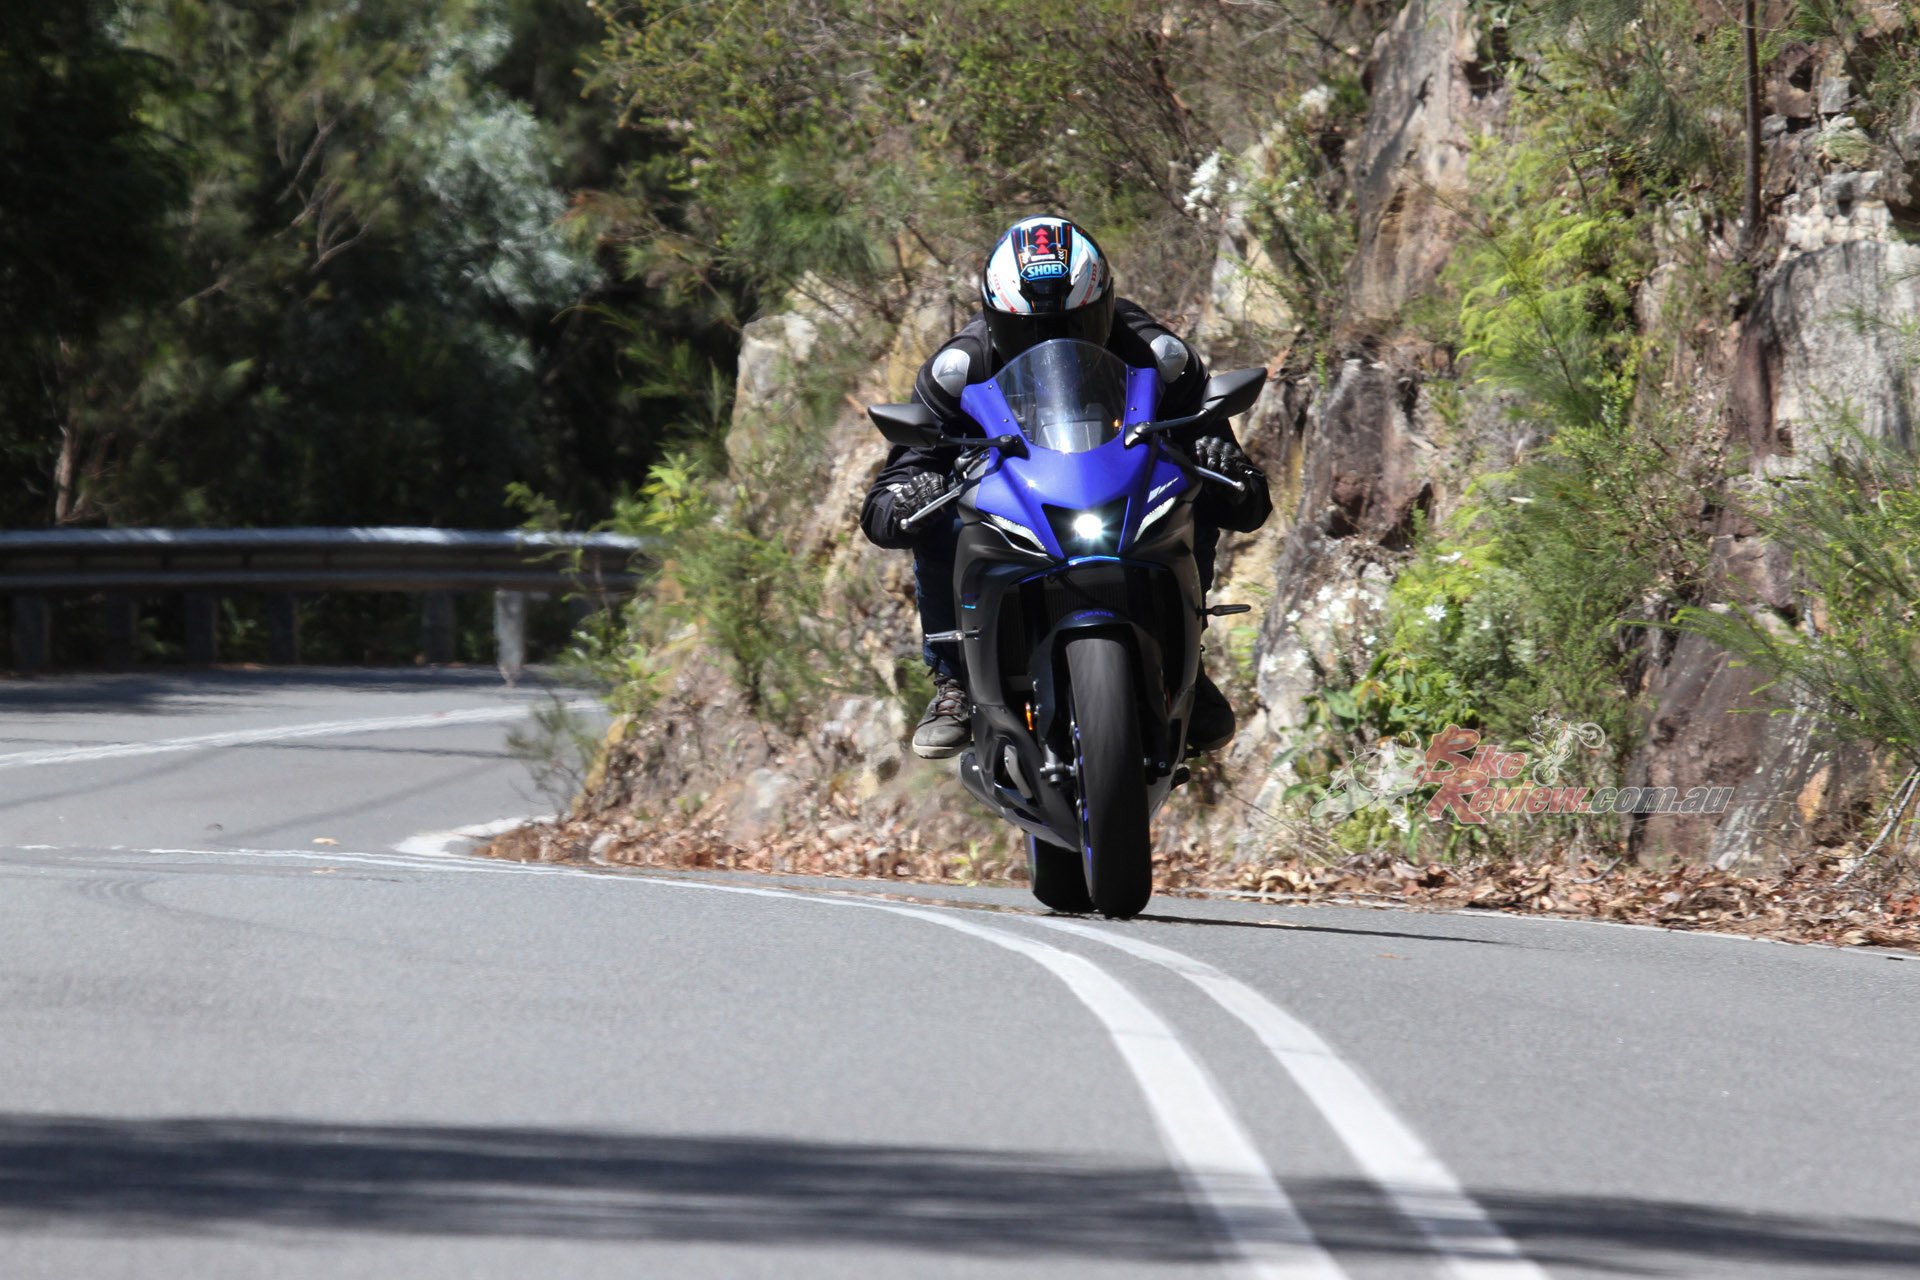 With so much technology for catching speeding riders these days, and strong penalties, these middleweight sportsbikes are more fun than the superbikes on the road.